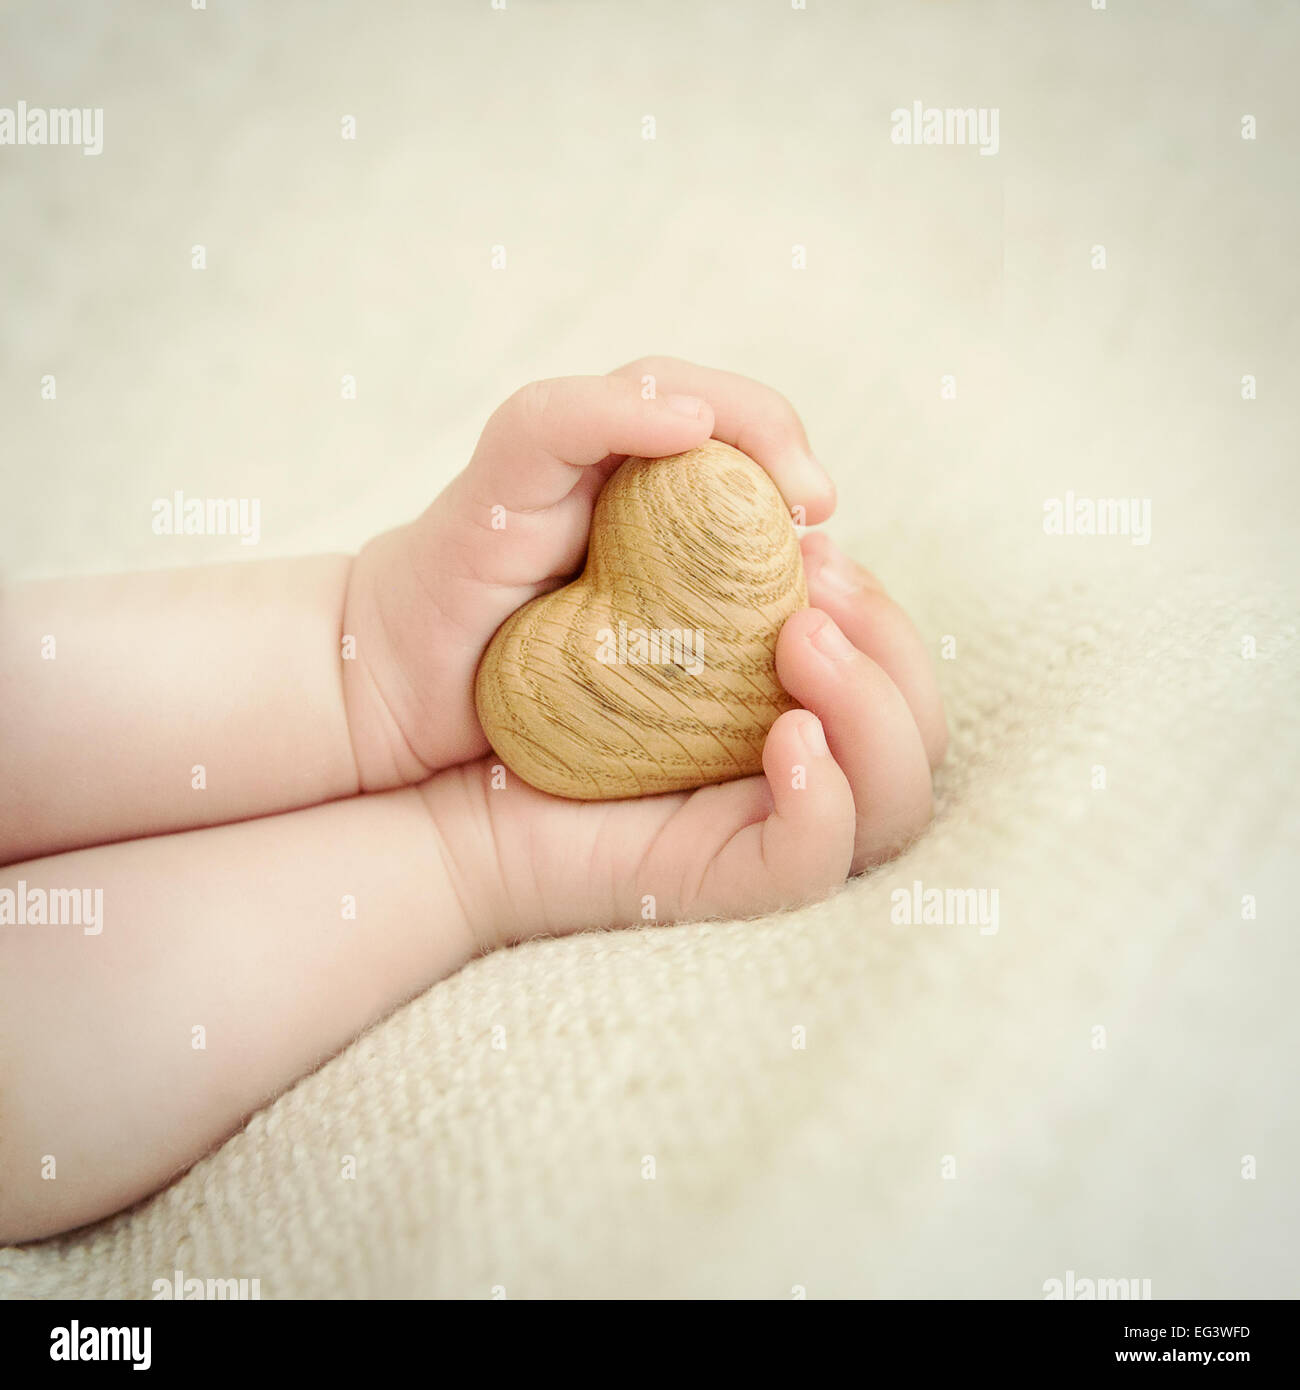 tiny baby hands to hold the wooden heart Stock Photo